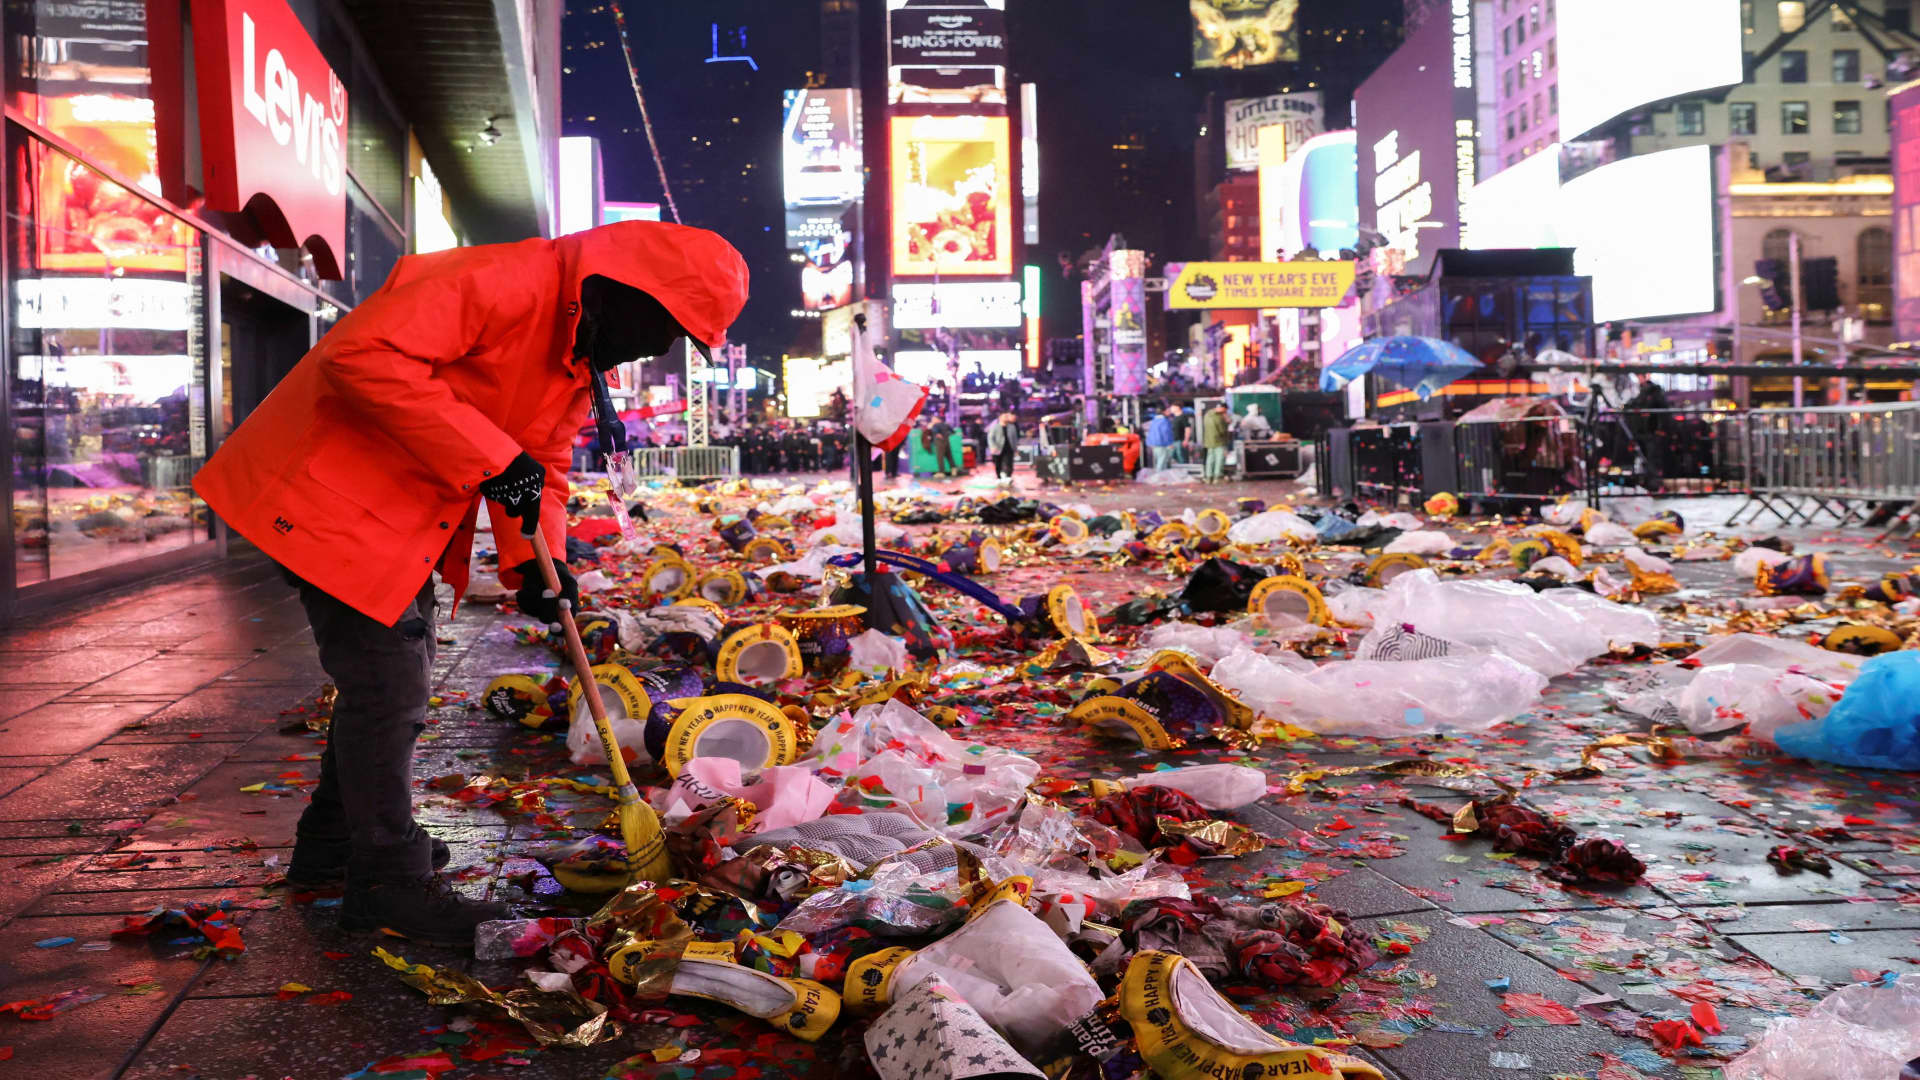 3 officers injured in New Year’s Eve machete attack near Times Square, officials say